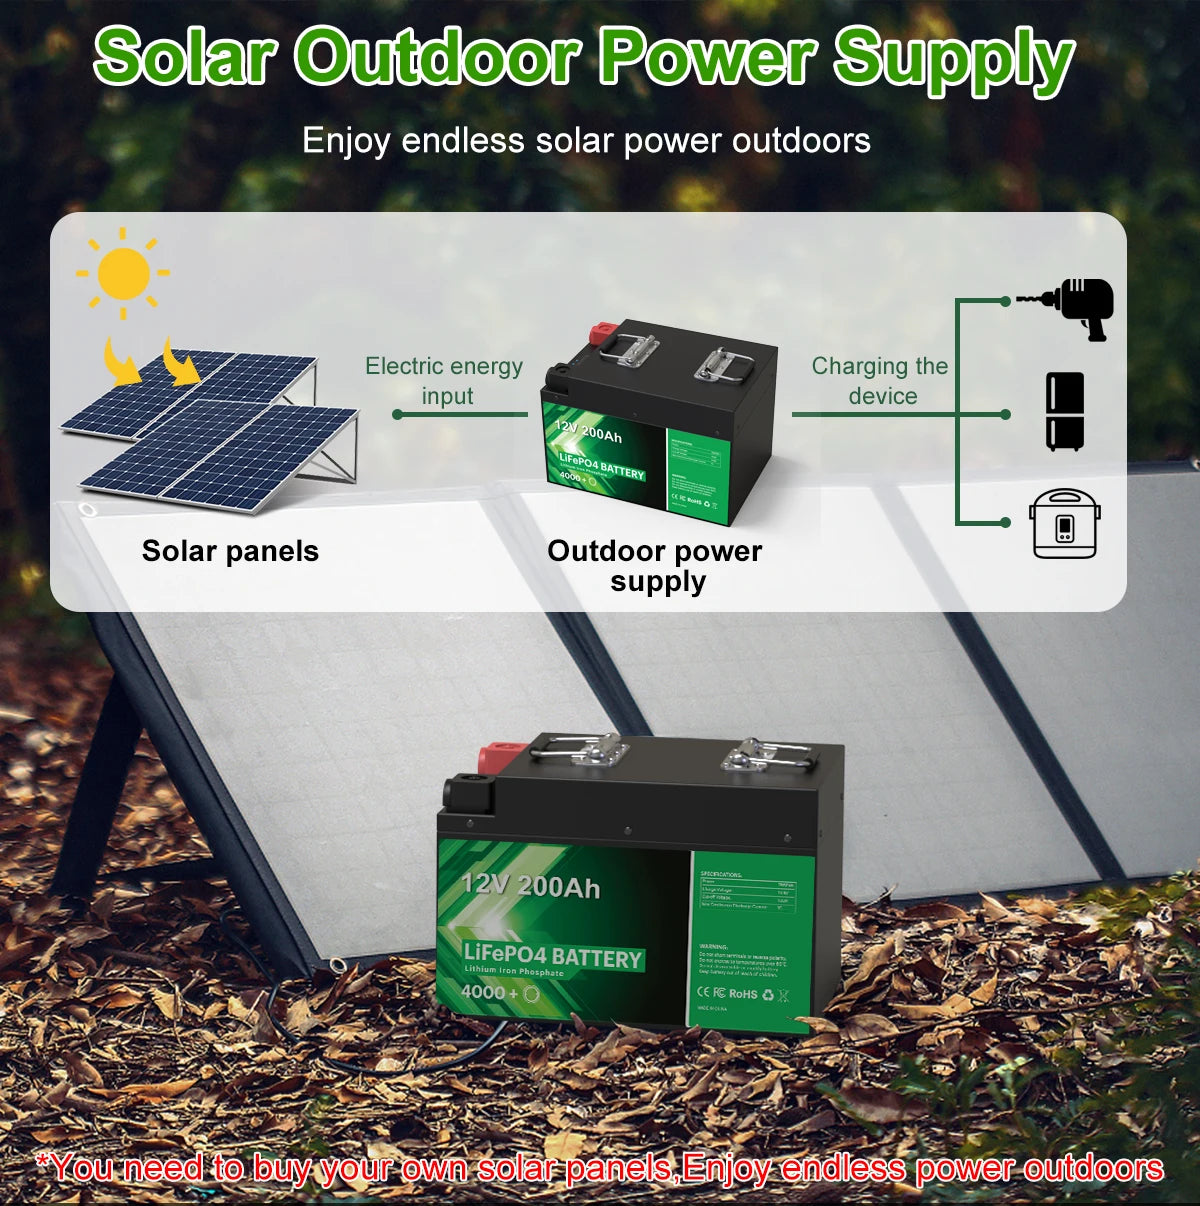 Rechargeable 12V 200Ah LiFePO4 battery pack for off-grid solar power and backup energy.